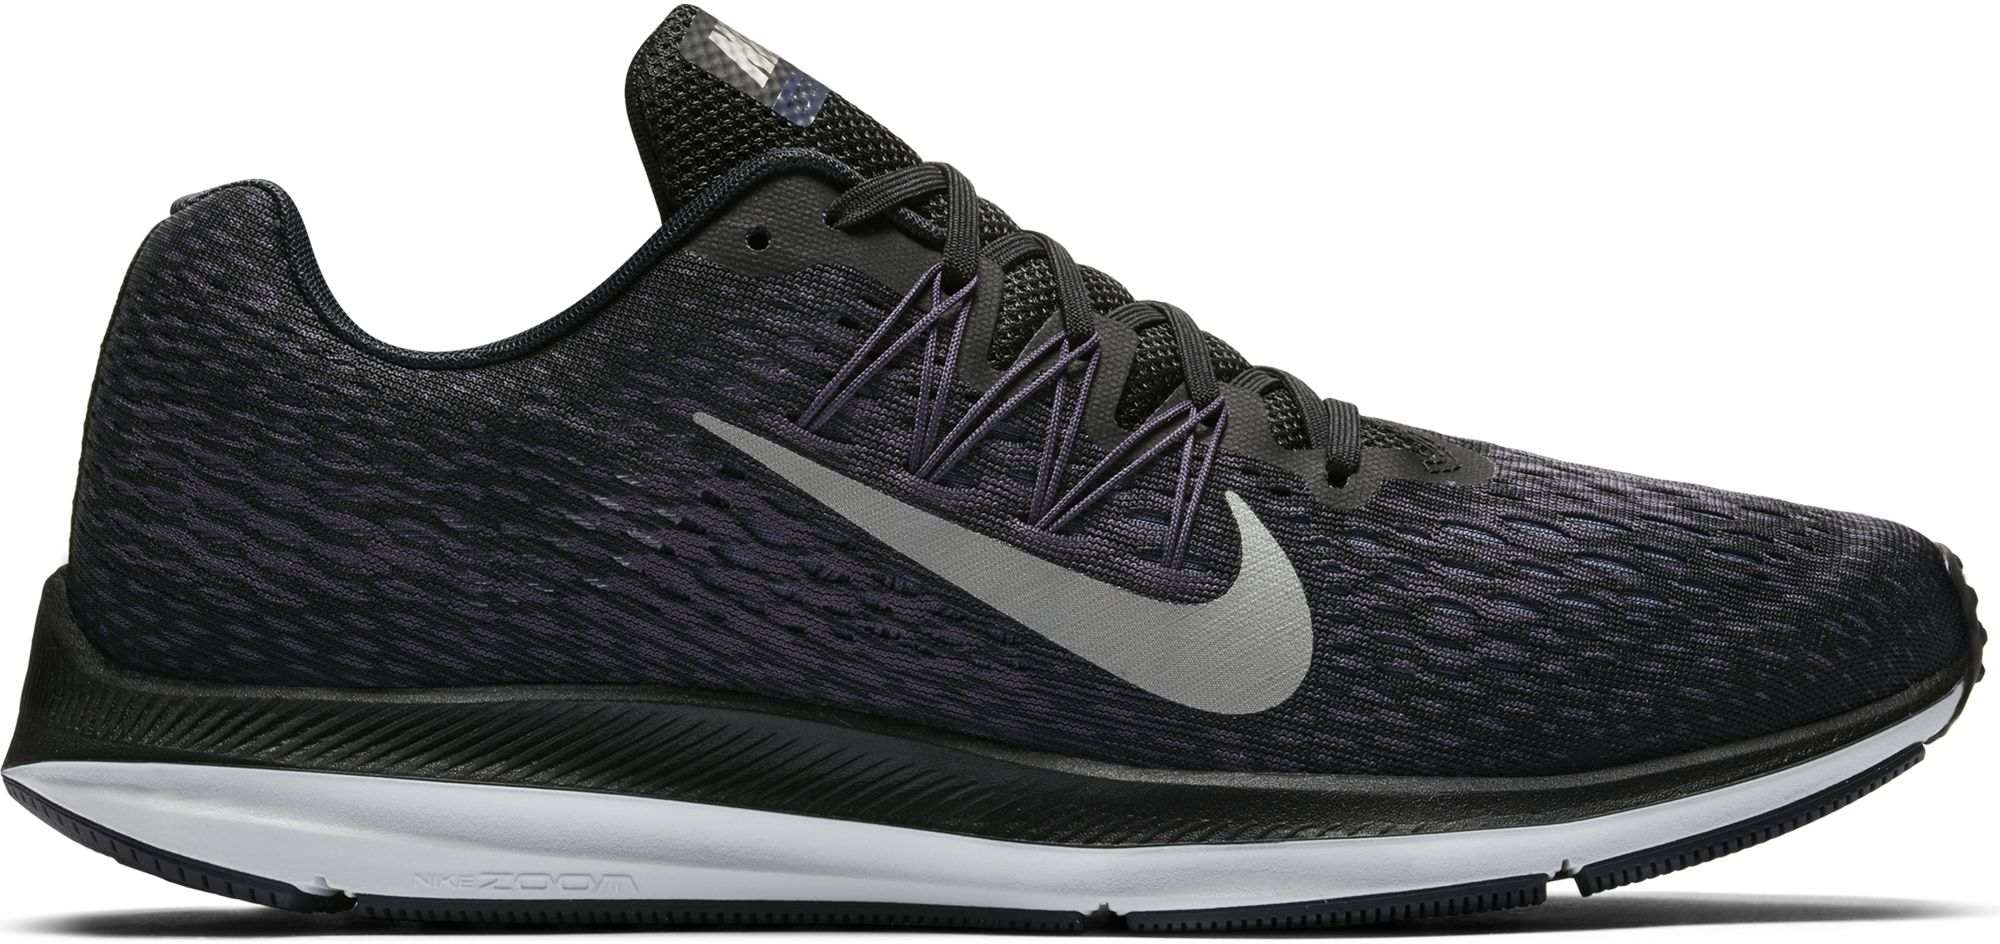 nike men's air zoom winflo 5 running shoes